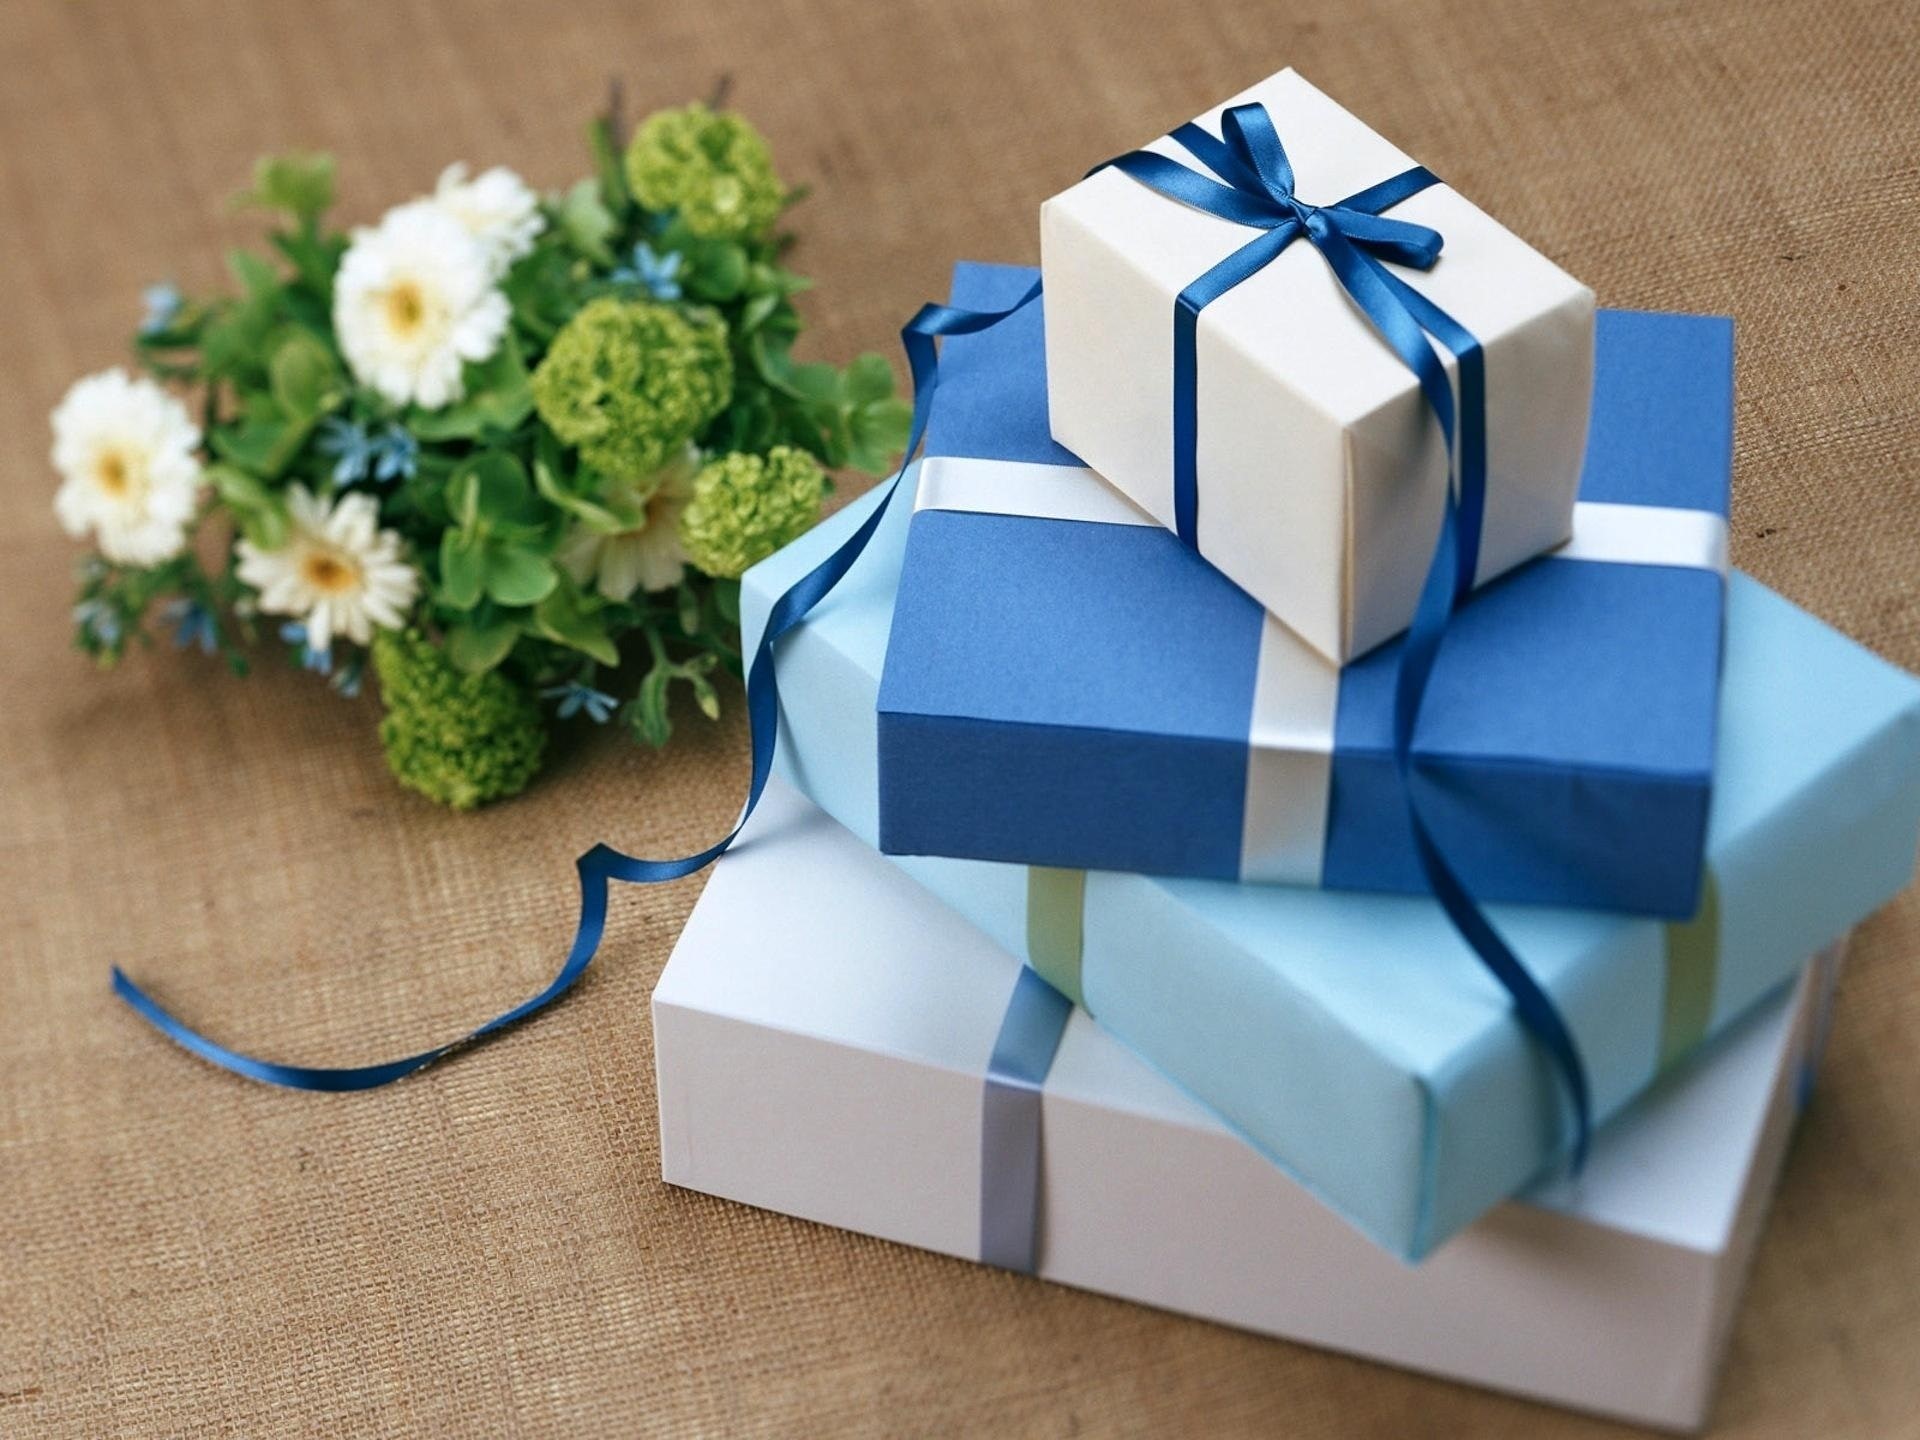 Should You Give A Gift To A Wedding You Can’t Attend?